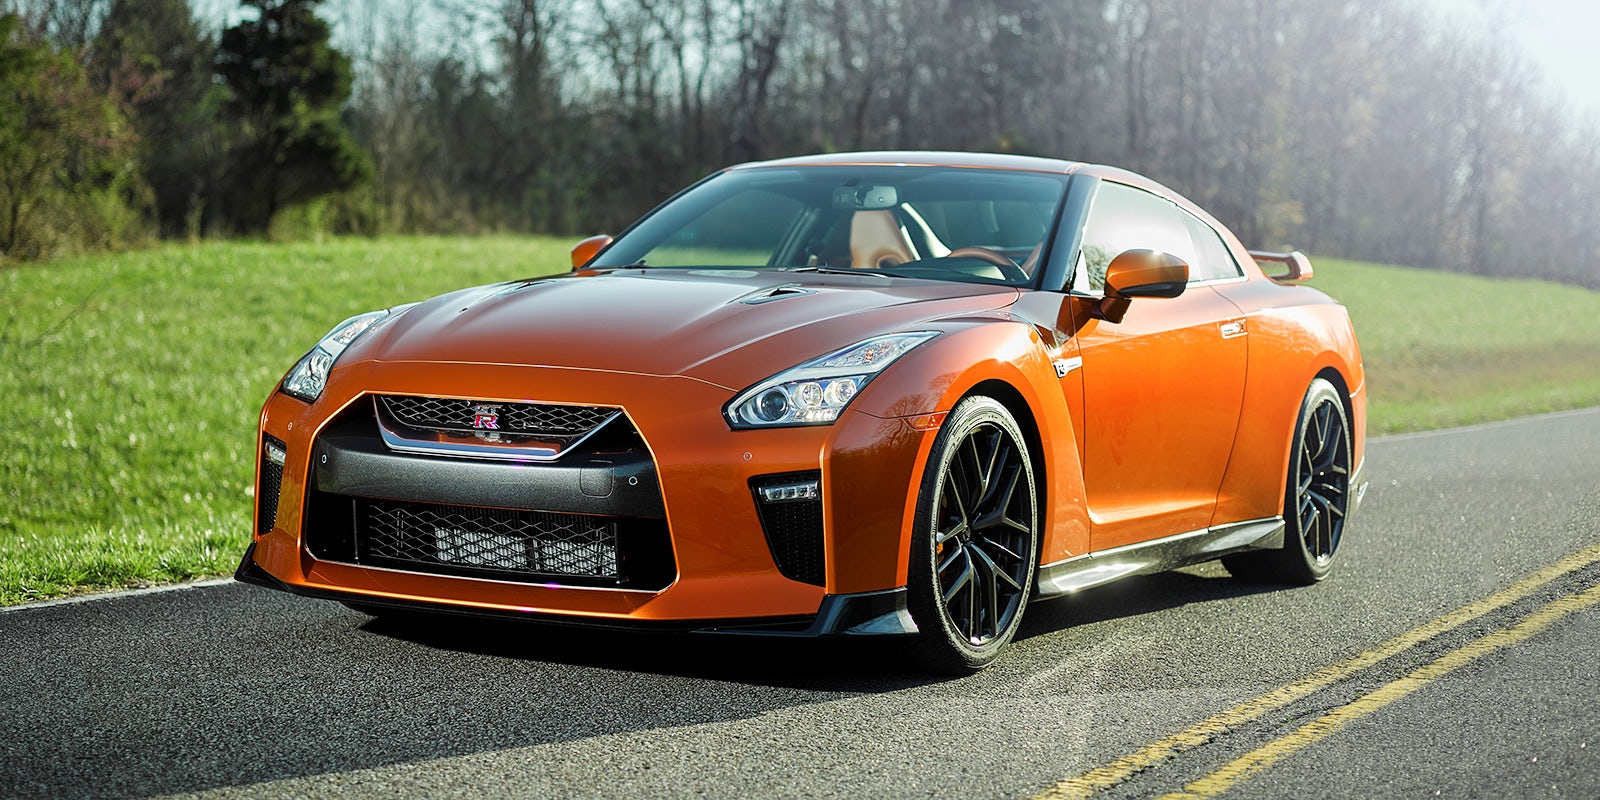 Nissan Gt-R Colours Guide And Prices | Carwow